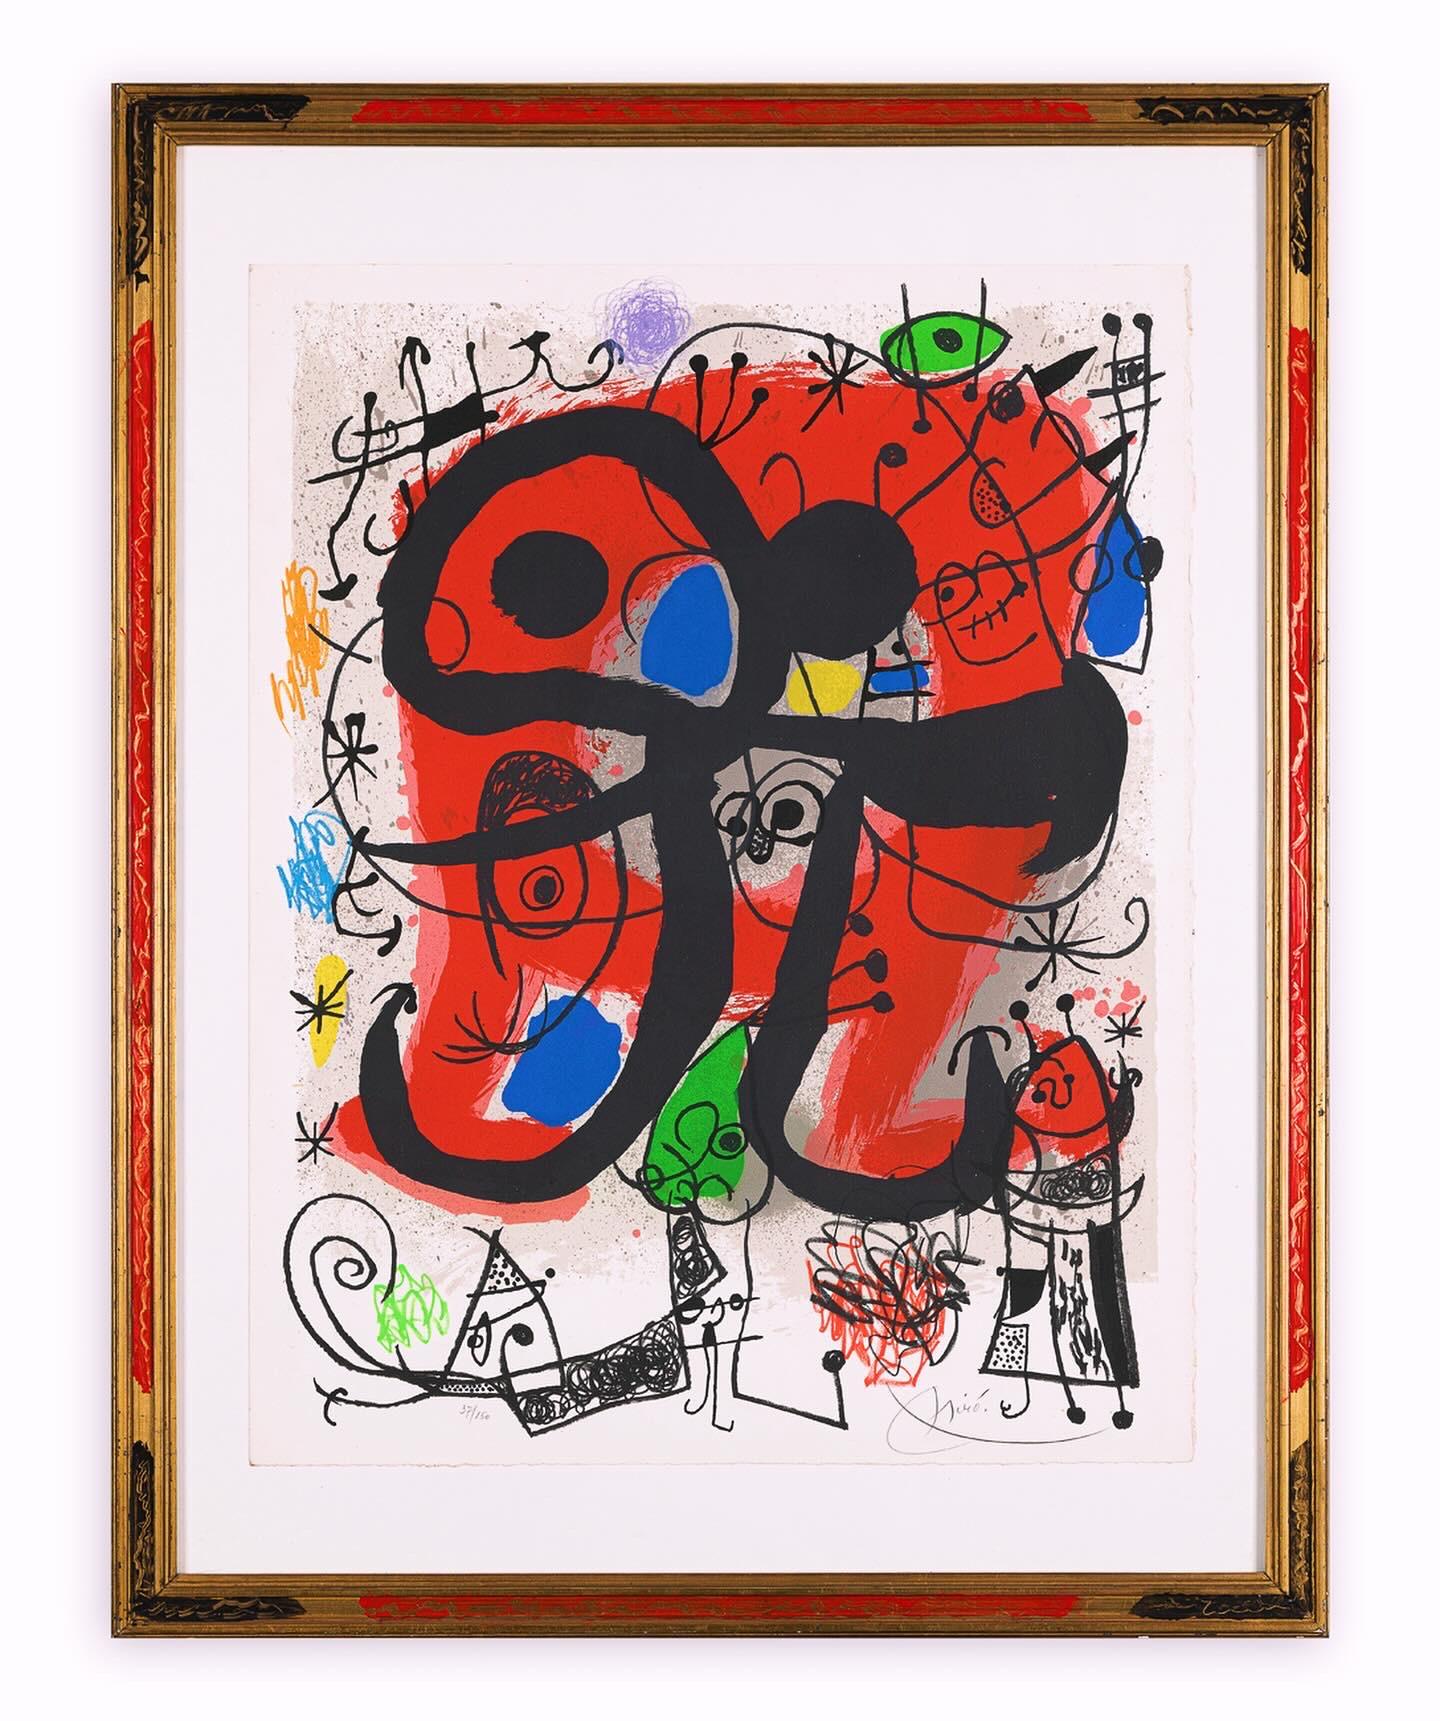 Joan Miró ( 1893 – 1983 ) – hand-signed Lithograph on Arches paper – 1971